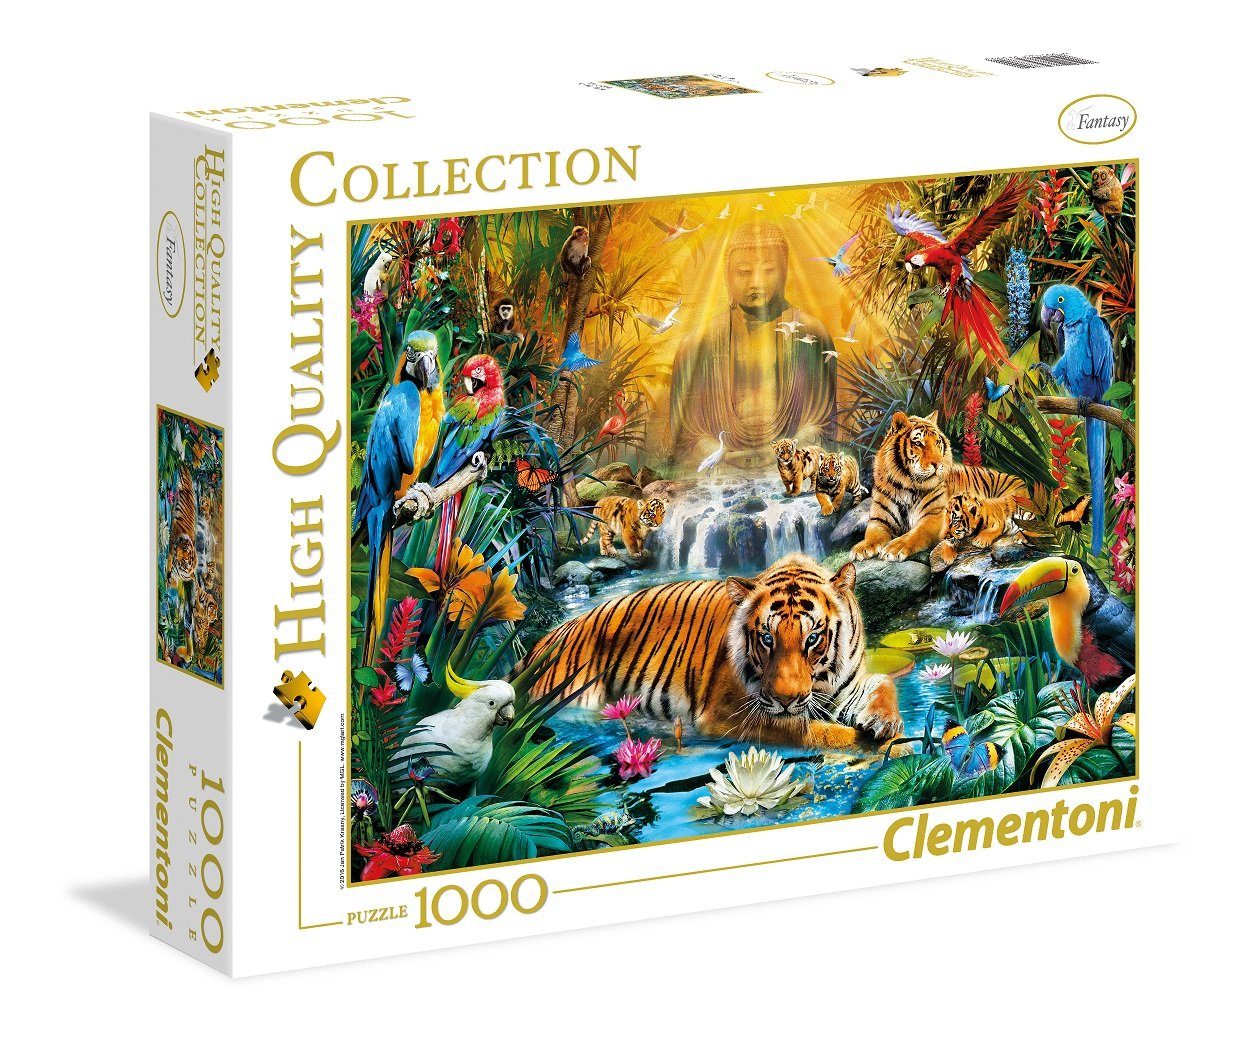 Clementoni® Puzzle Puzzles 501 bis 1000 Teile Clem-39380, Puzzleteile, Made in Europe